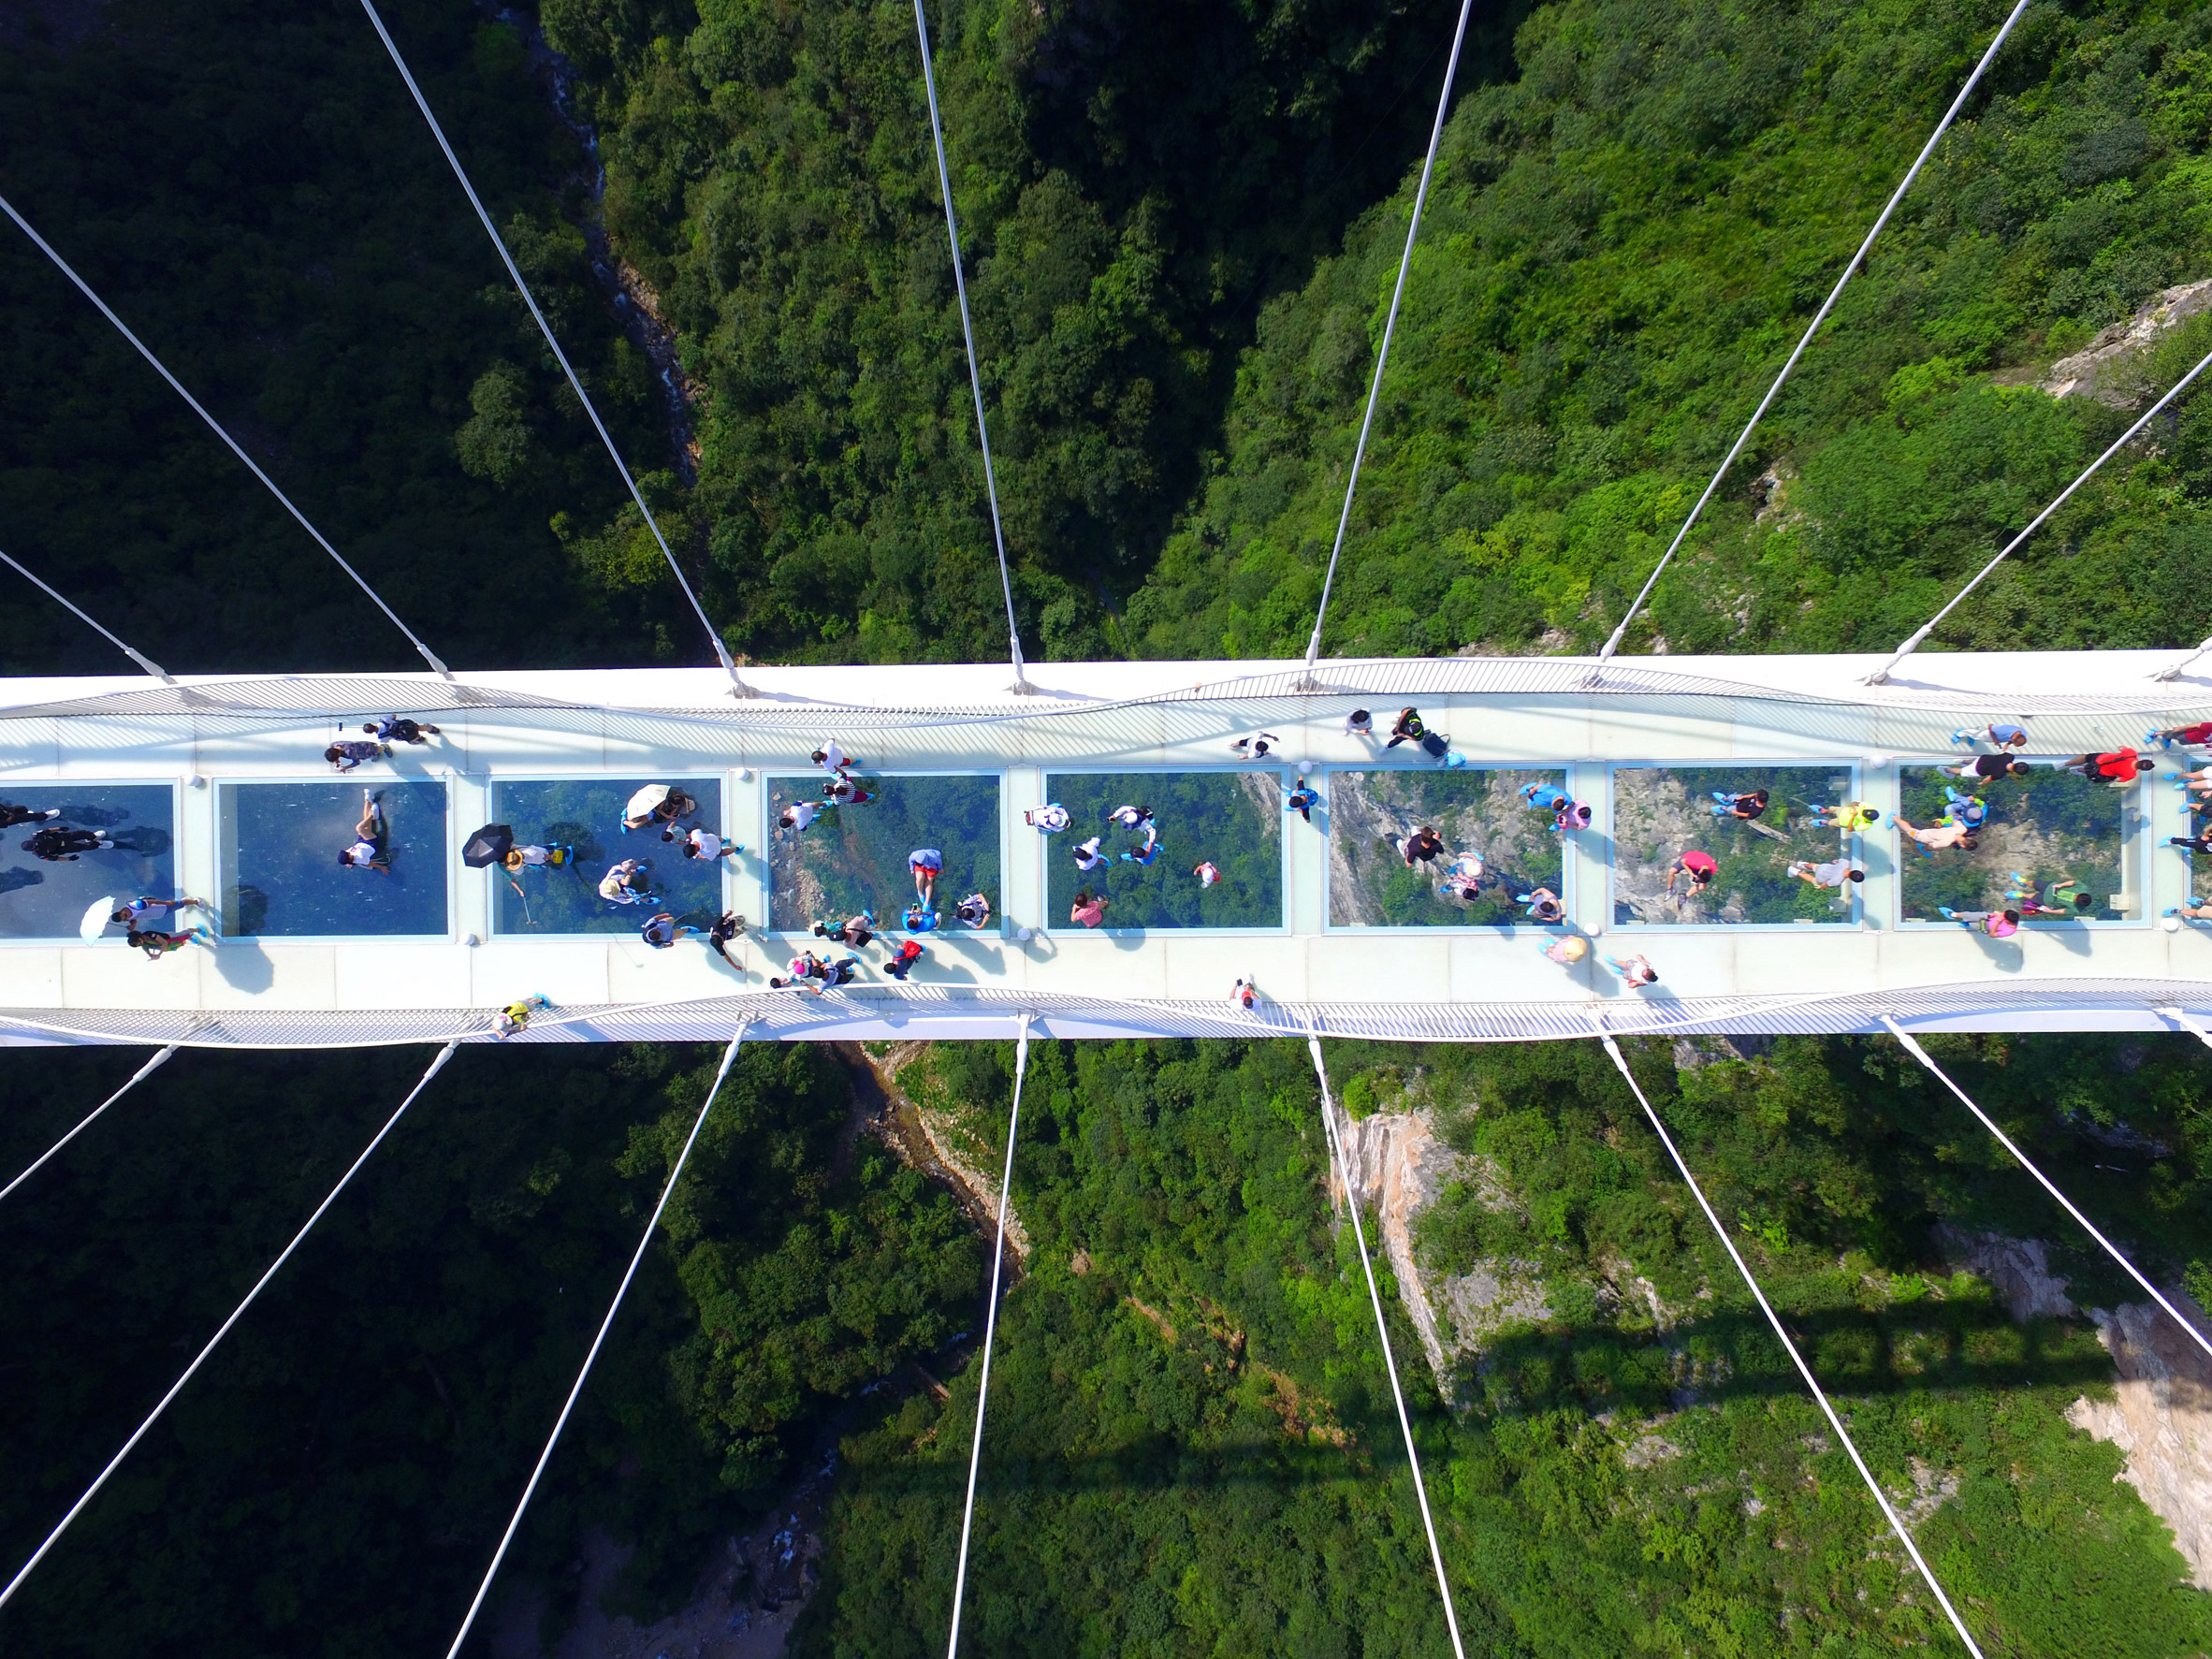 World's tallest and longest glass bridge opens in China